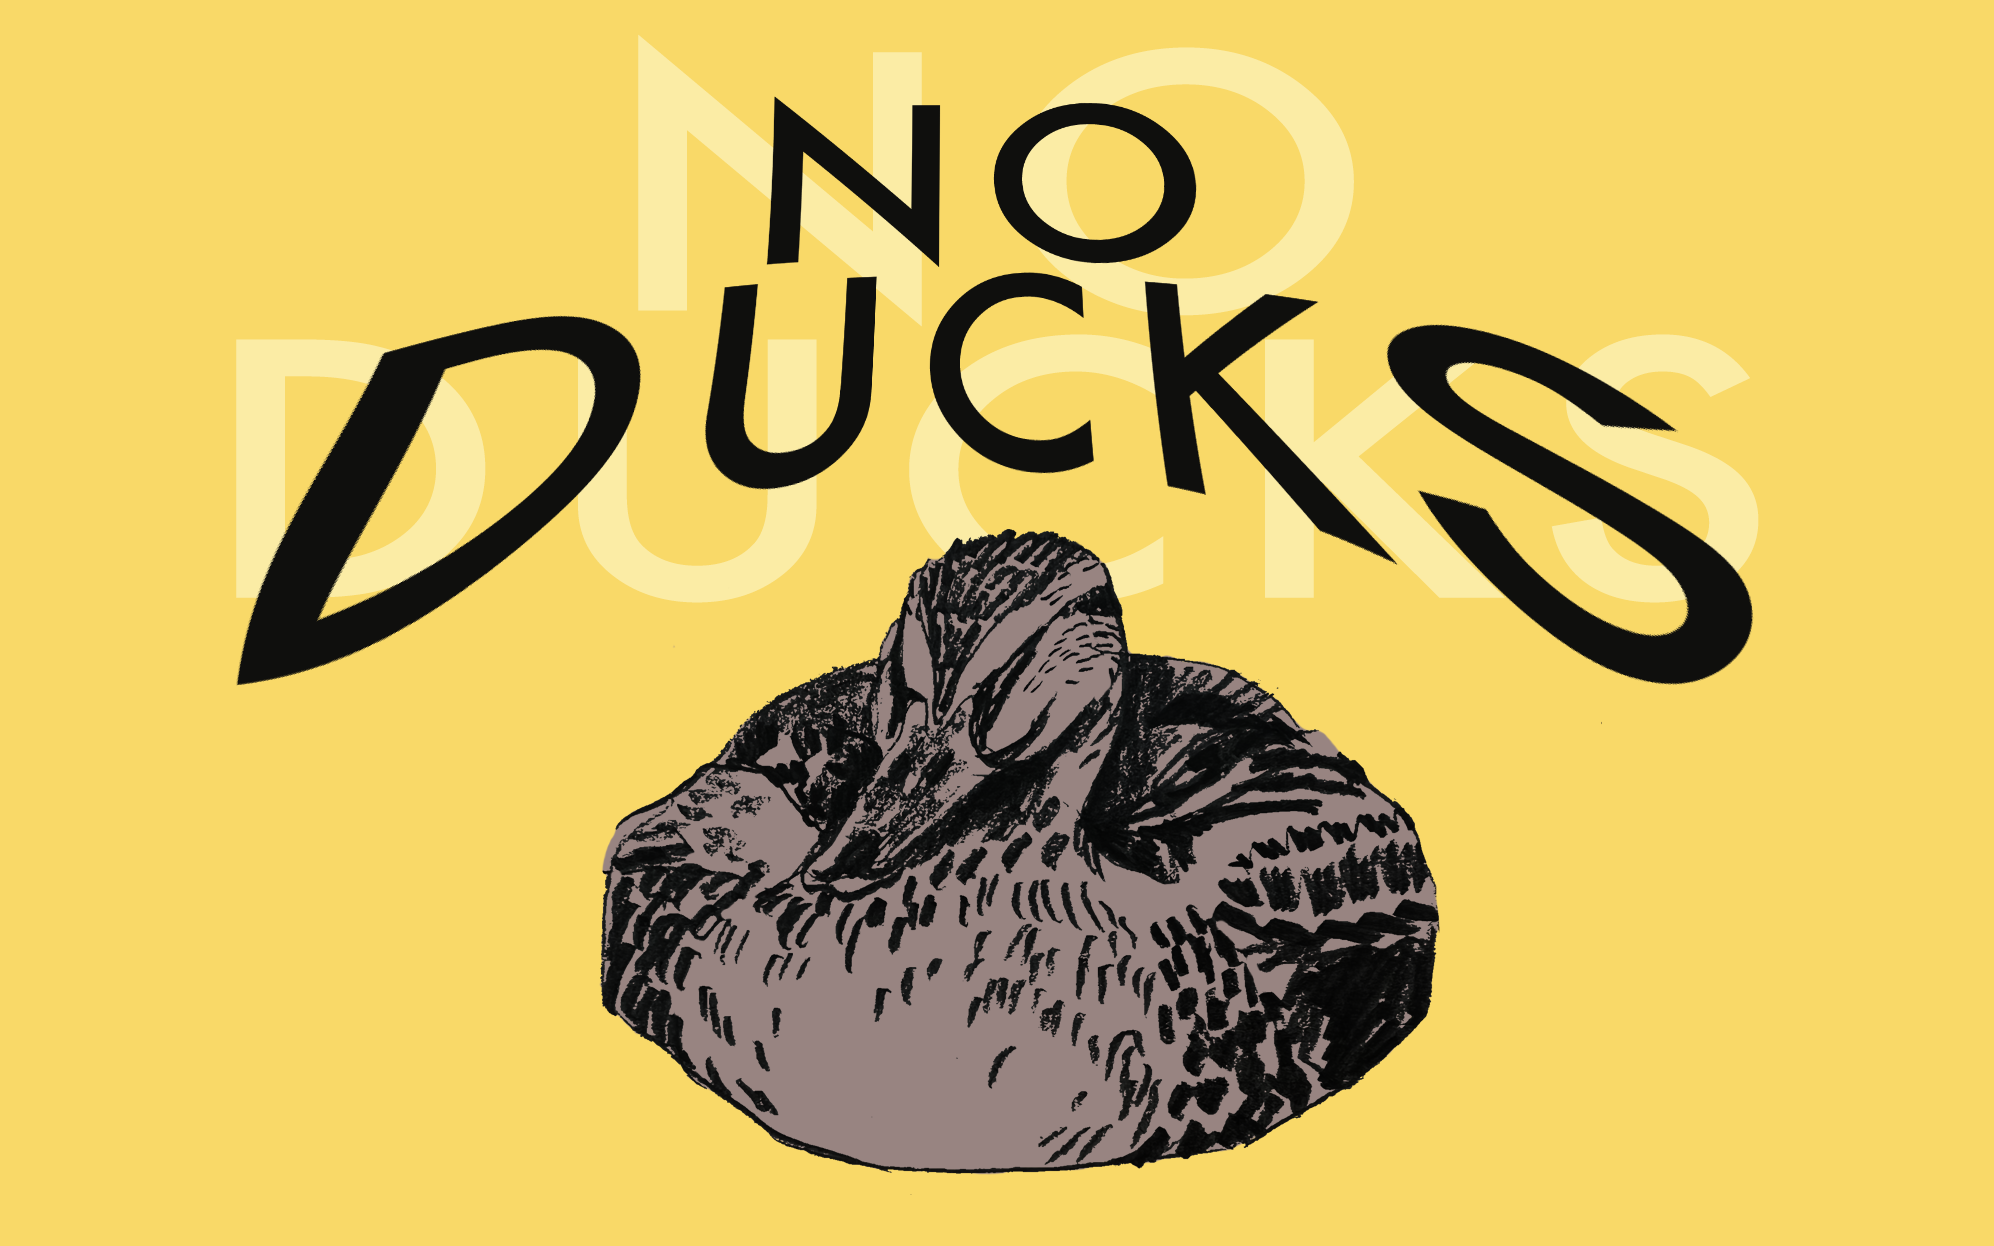 On a yellow background, the text No Ducks floats above a drawing of a brown duck sleeping.